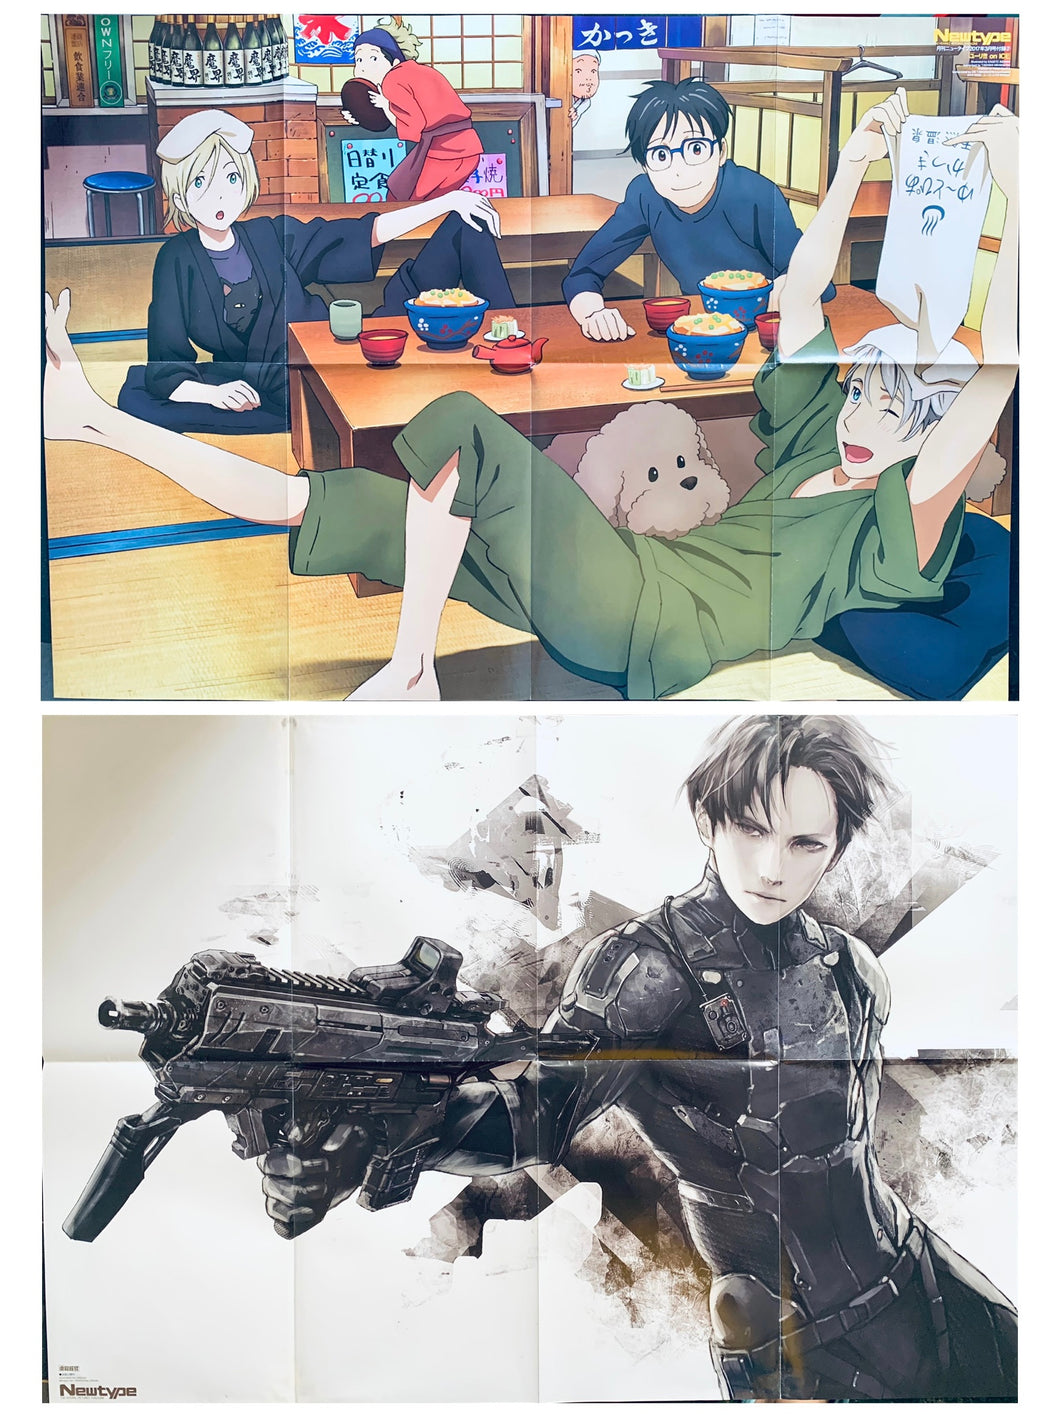 Yuri!!! On ICE / Genocidal Organ - Clavis Shepherd - Double-sided B2 Poster - Monthly NewType March 2017 Appendix 2